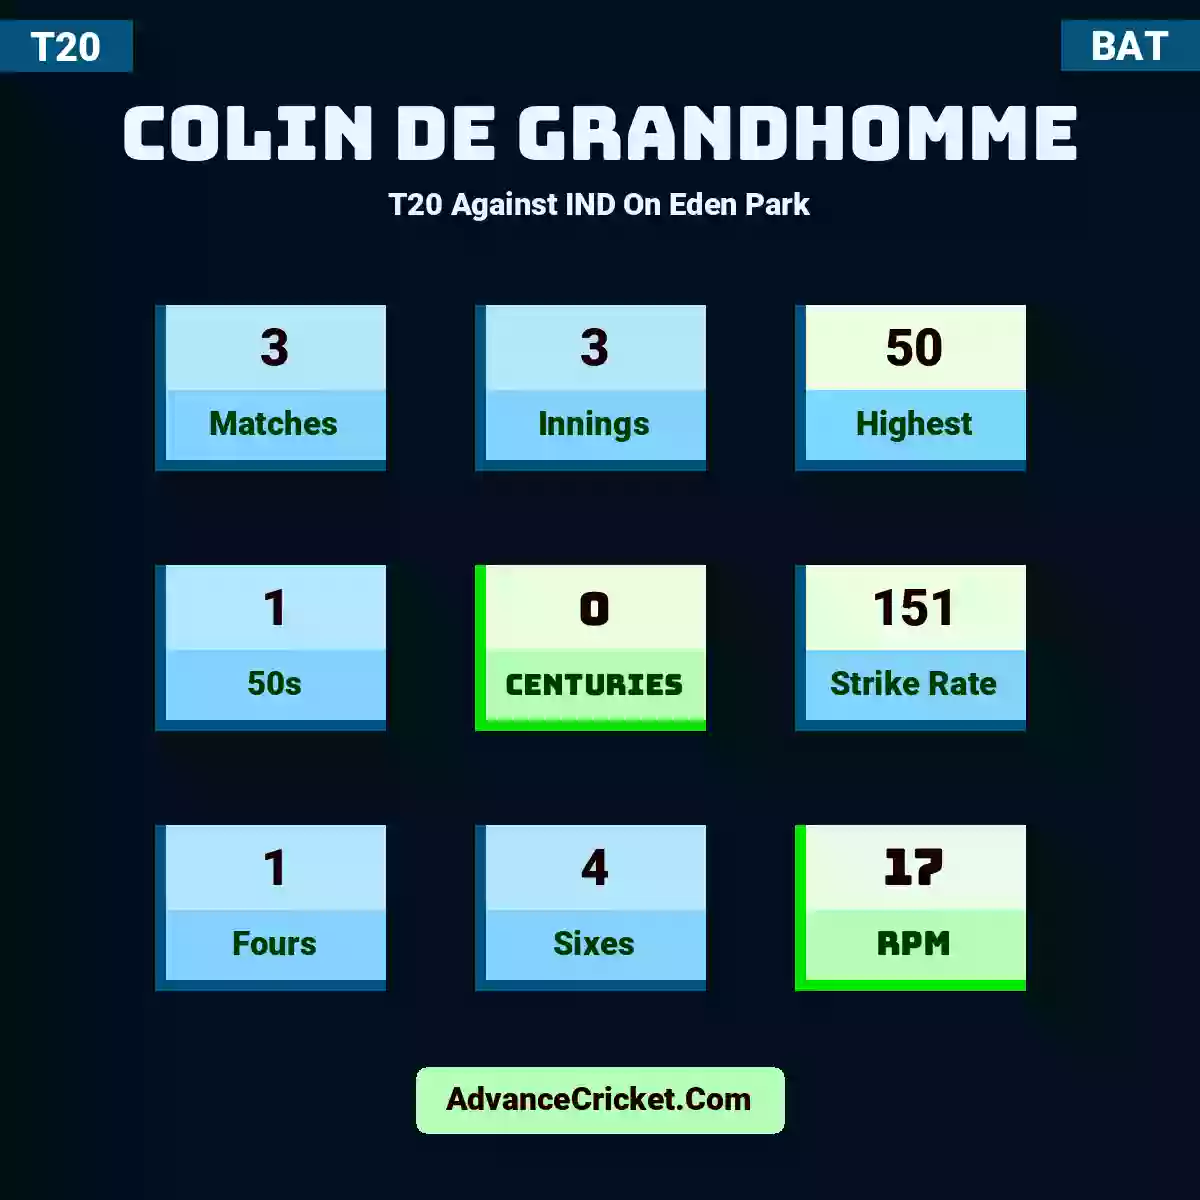 Colin de Grandhomme T20  Against IND On Eden Park, Colin de Grandhomme played 3 matches, scored 50 runs as highest, 1 half-centuries, and 0 centuries, with a strike rate of 151. C.Grandhomme hit 1 fours and 4 sixes, with an RPM of 17.